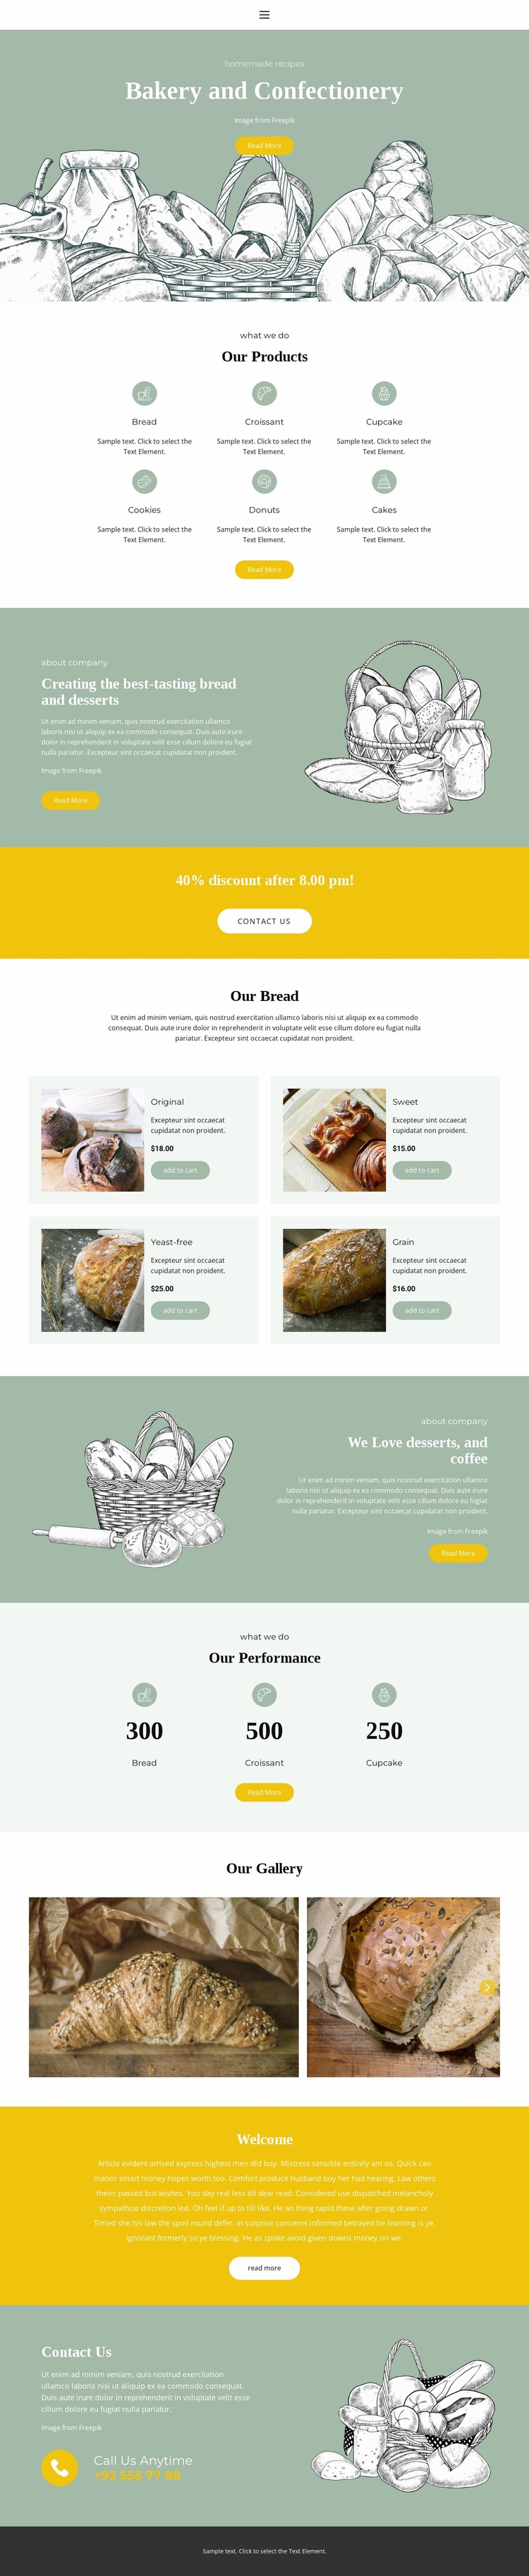 Baking and confectionery WordPress Website Builder